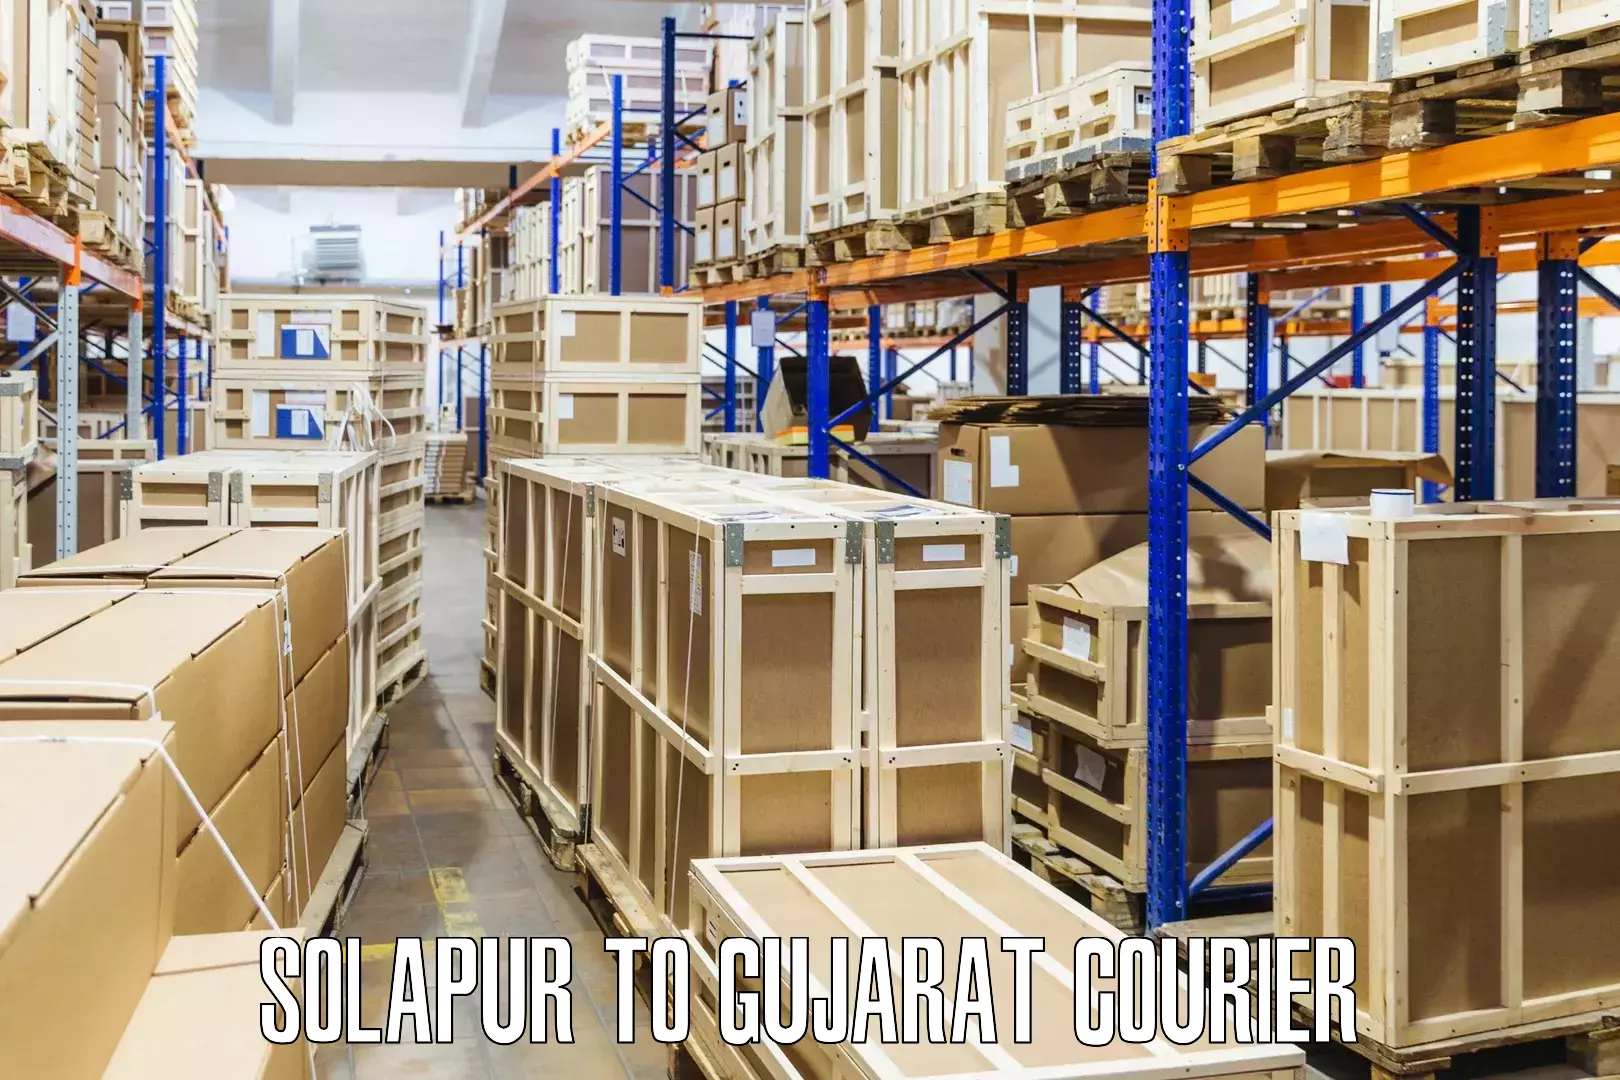 Modern delivery technologies Solapur to Gujarat